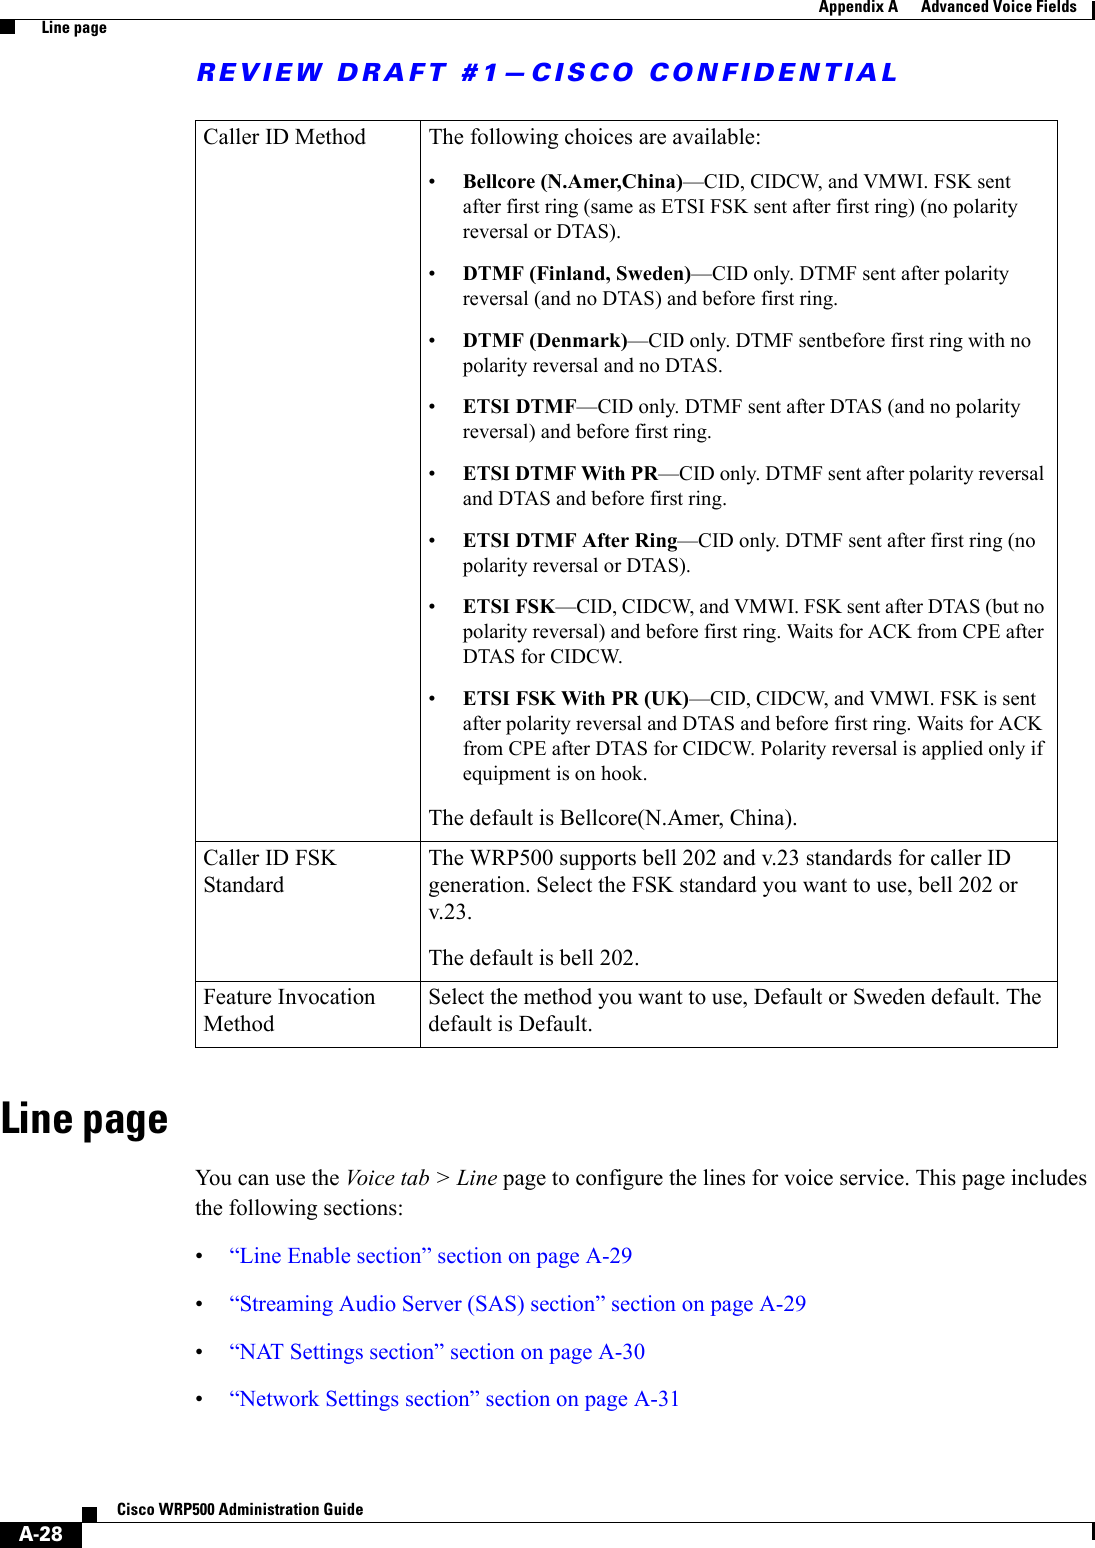 REVIEW DRAFT #1—CISCO CONFIDENTIALA-28Cisco WRP500 Administration Guide Appendix A      Advanced Voice Fields  Line pageLine pageYou can use the Voice tab &gt; Line page to configure the lines for voice service. This page includes the following sections:•“Line Enable section” section on page A-29•“Streaming Audio Server (SAS) section” section on page A-29•“NAT Settings section” section on page A-30•“Network Settings section” section on page A-31Caller ID Method  The following choices are available:•Bellcore (N.Amer,China)—CID, CIDCW, and VMWI. FSK sent after first ring (same as ETSI FSK sent after first ring) (no polarity reversal or DTAS).•DTMF (Finland, Sweden)—CID only. DTMF sent after polarity reversal (and no DTAS) and before first ring.•DTMF (Denmark)—CID only. DTMF sentbefore first ring with no polarity reversal and no DTAS.•ETSI DTMF—CID only. DTMF sent after DTAS (and no polarity reversal) and before first ring.•ETSI DTMF With PR—CID only. DTMF sent after polarity reversal and DTAS and before first ring.•ETSI DTMF After Ring—CID only. DTMF sent after first ring (no polarity reversal or DTAS). •ETSI FSK—CID, CIDCW, and VMWI. FSK sent after DTAS (but no polarity reversal) and before first ring. Waits for ACK from CPE after DTAS for CIDCW.•ETSI FSK With PR (UK)—CID, CIDCW, and VMWI. FSK is sent after polarity reversal and DTAS and before first ring. Waits for ACK from CPE after DTAS for CIDCW. Polarity reversal is applied only if equipment is on hook.The default is Bellcore(N.Amer, China).Caller ID FSK Standard The WRP500 supports bell 202 and v.23 standards for caller ID generation. Select the FSK standard you want to use, bell 202 or v.23.The default is bell 202.Feature Invocation Method Select the method you want to use, Default or Sweden default. The default is Default.